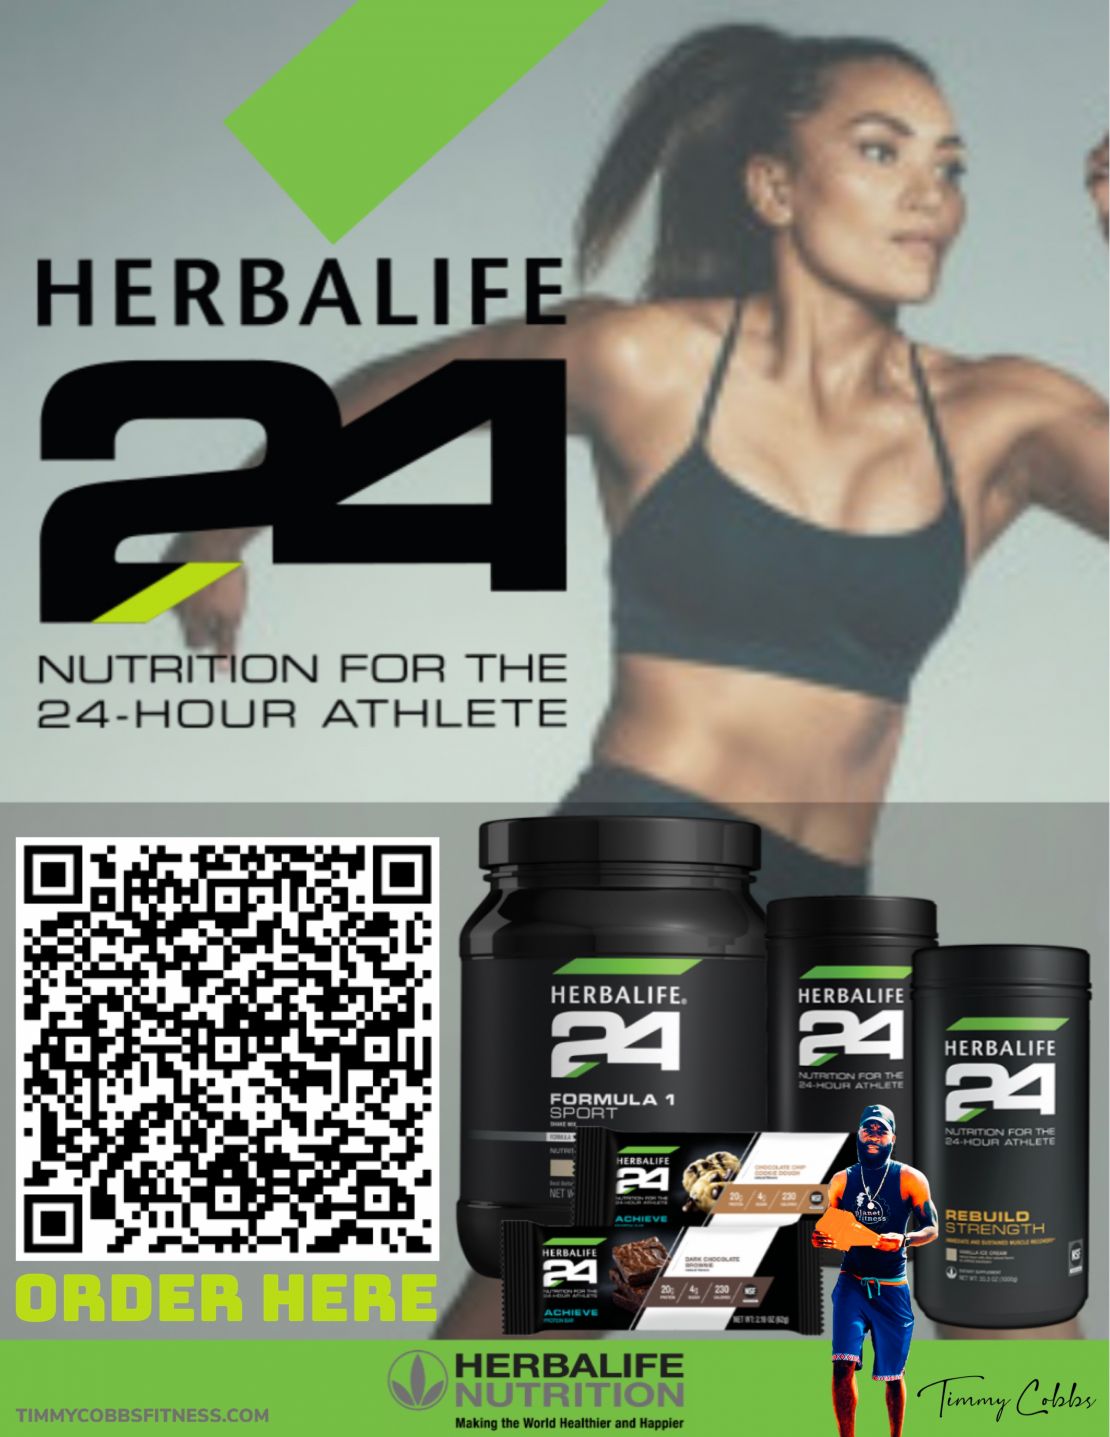 Herbalife 24 nutrition for athletes 